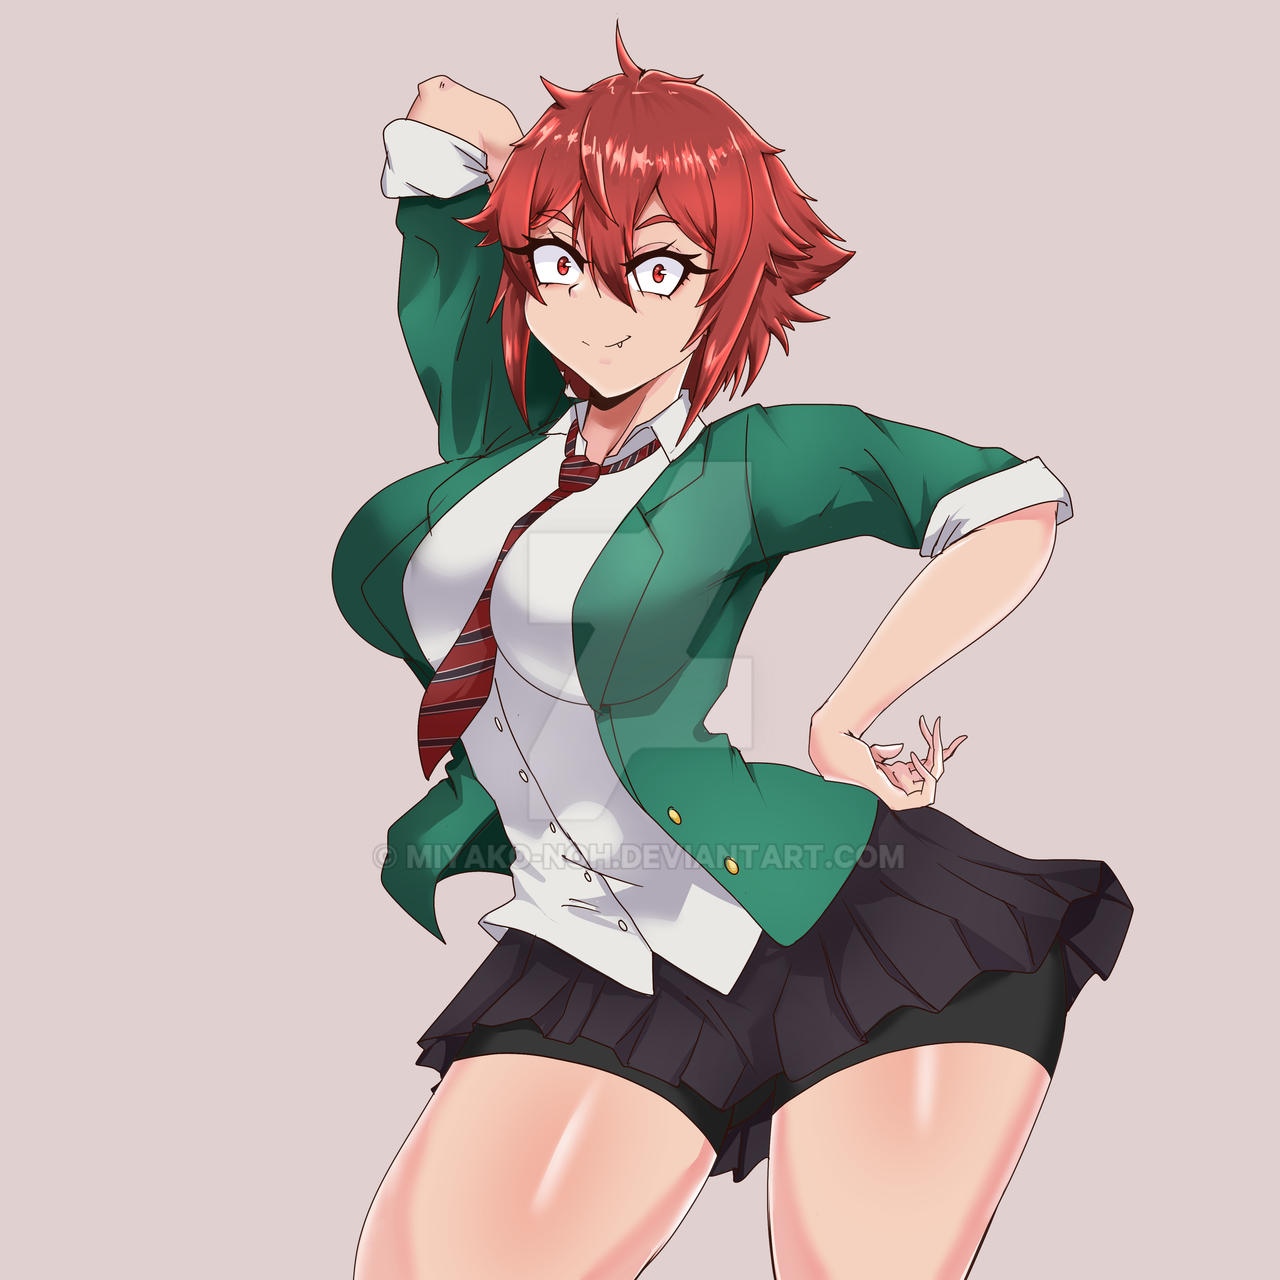 Tomo-chan by KluverDesigns on DeviantArt